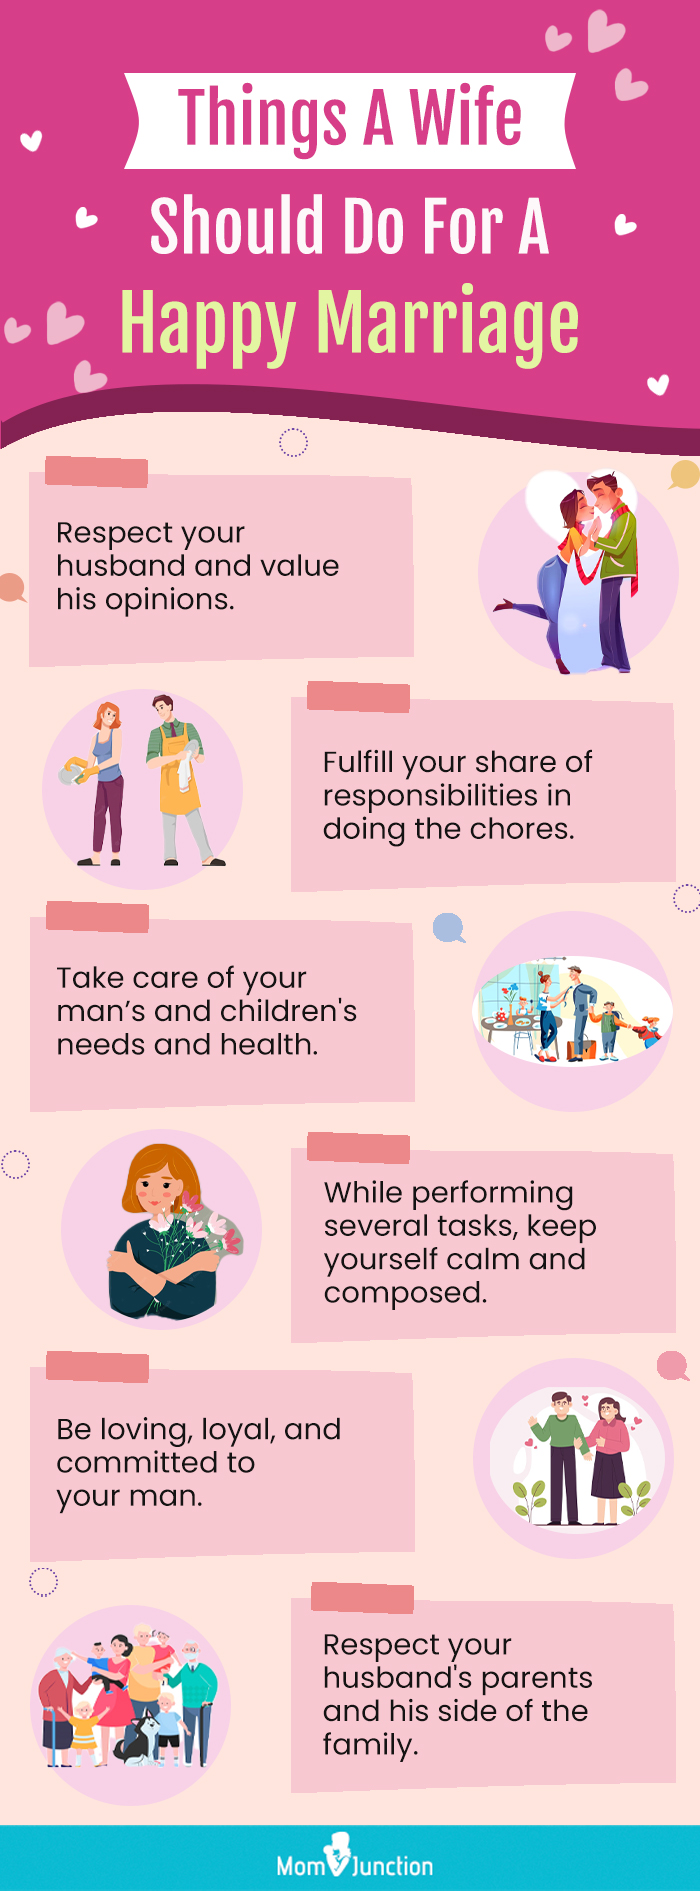 things a wife should do for a happy marriage [infographic]